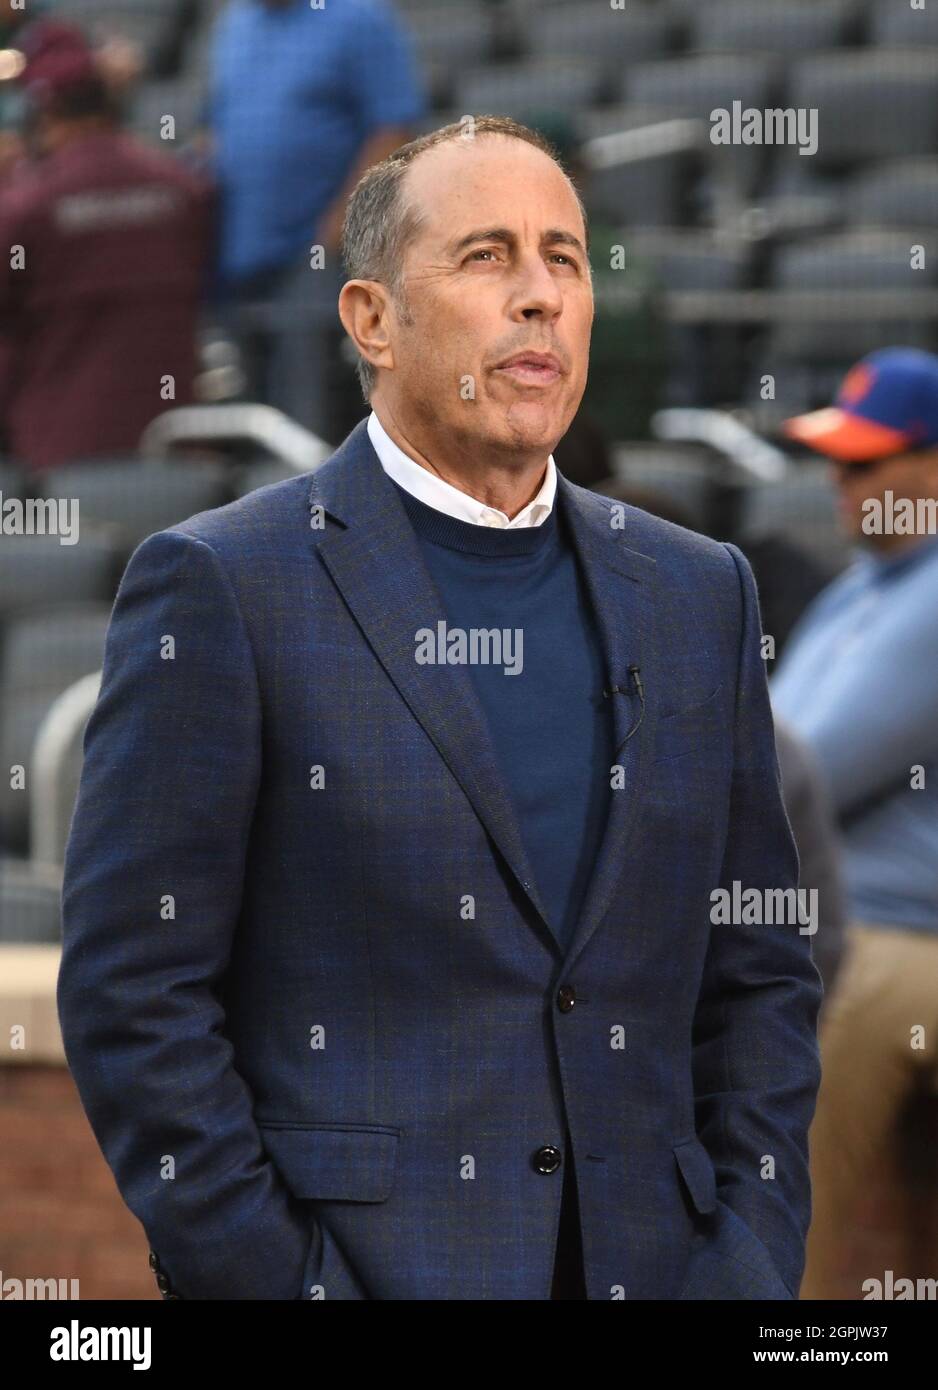 Queens, NY, USA. 29th Sep, 2021. Jerry Seinfeld pictured before the NY Mets vs. the Miami Marlins Game at Citi field in Queens, New York City on September 29, 2021. Credit: John Palmer/Media Punch/Alamy Live News Stock Photo